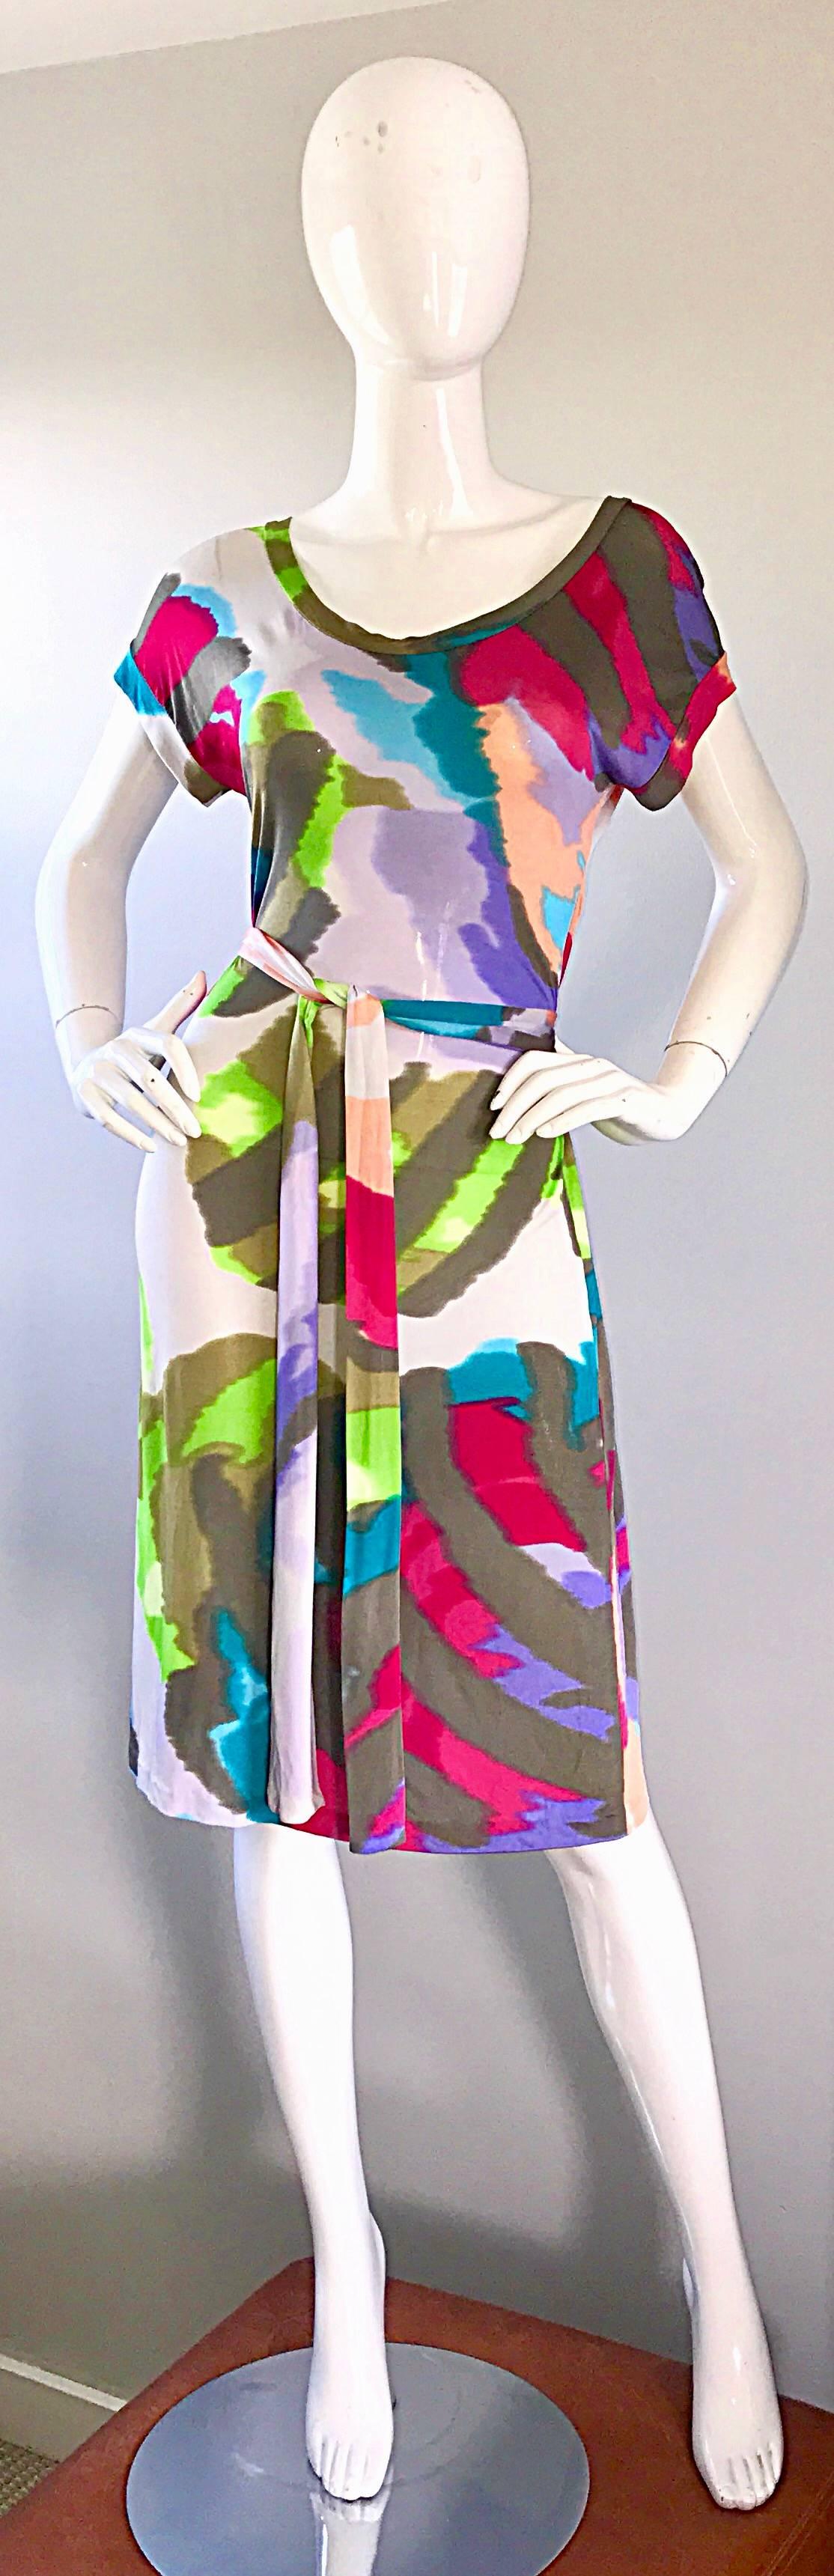 Smashing brand new ETRO tie dye printed silk jersey belted short sleeve dress! Features vibrant colors of pink, purple, green, hunter green, white, fuchsia, and lilac throughout. Intricate pleating detail on the back, and the belt make this beauty